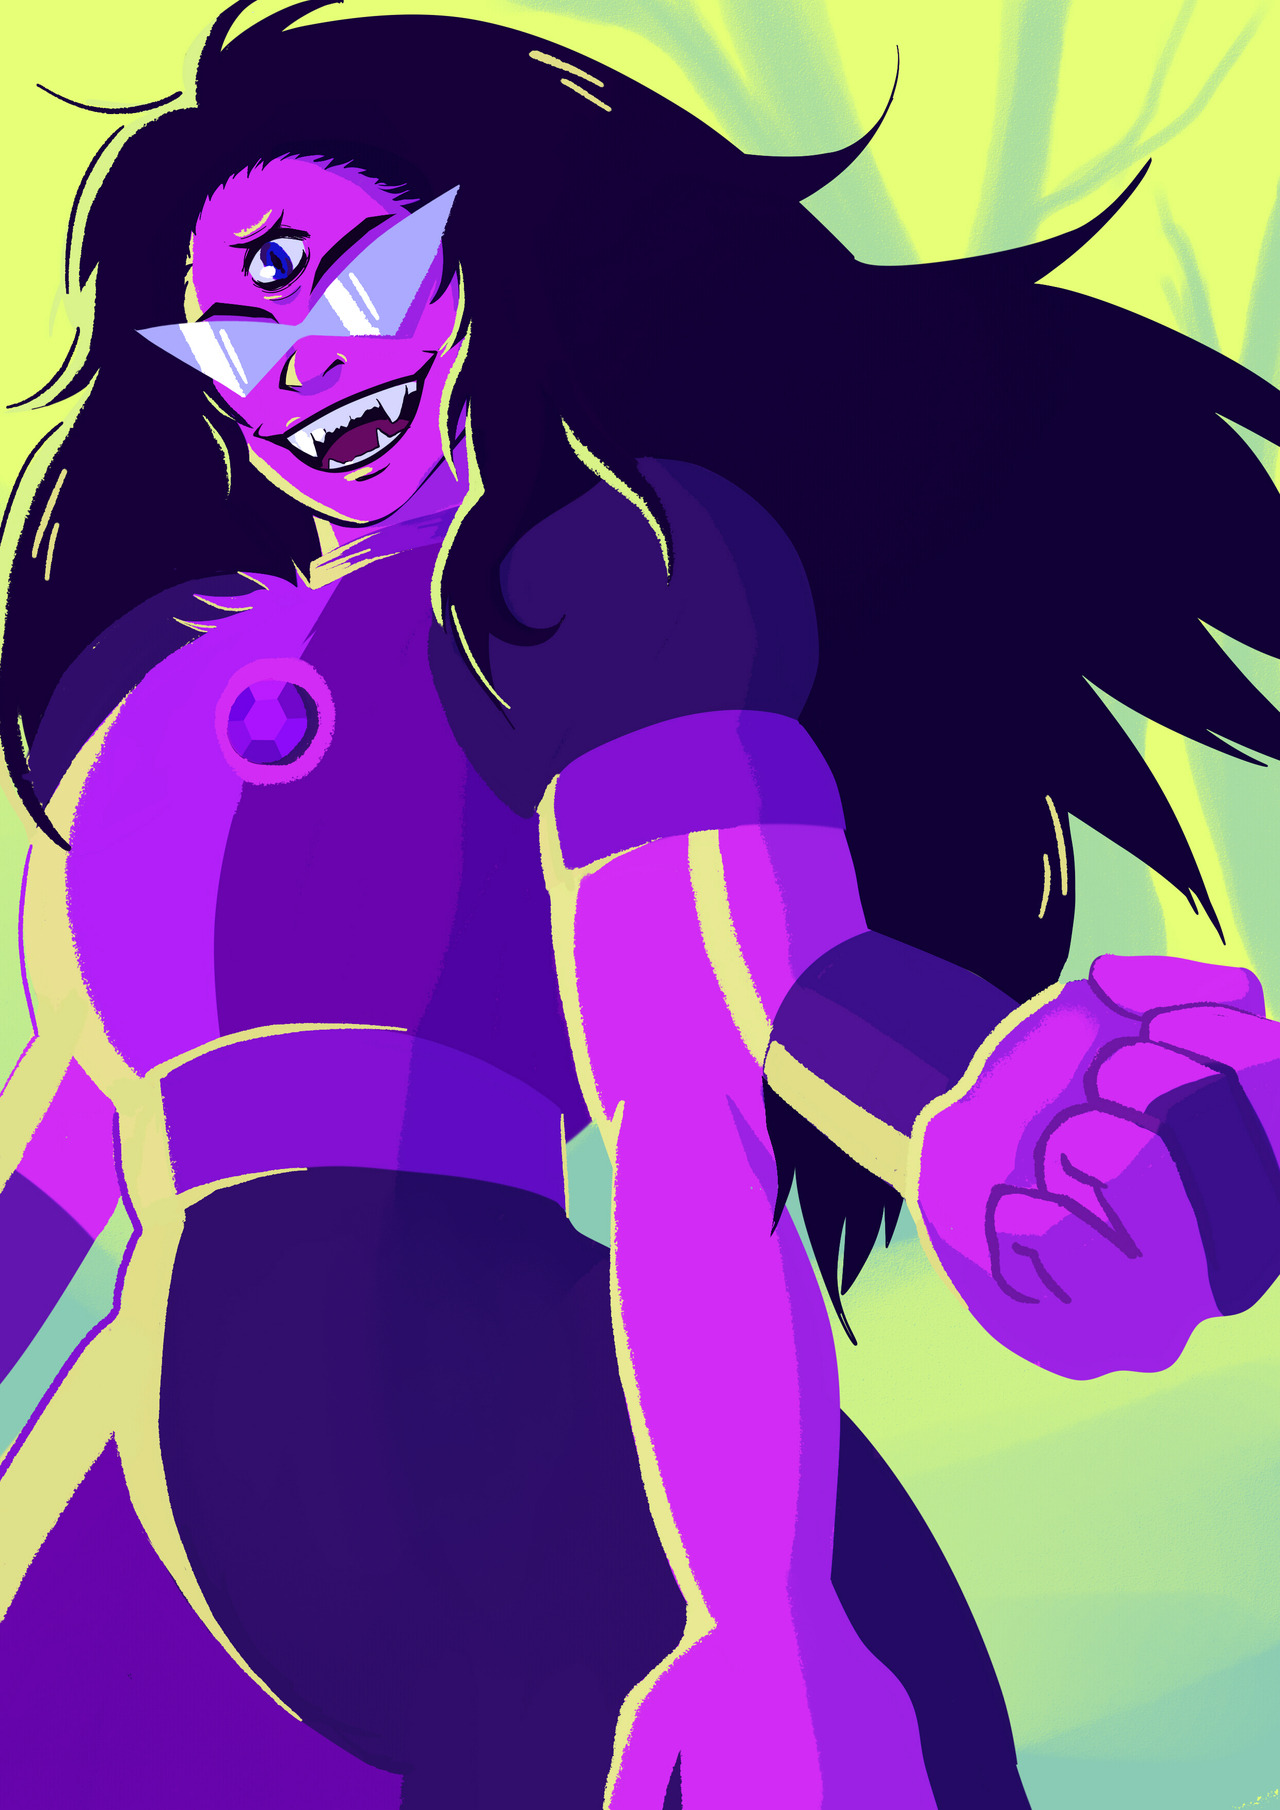 I have a thing for strong ladies Amethyst & Jasper